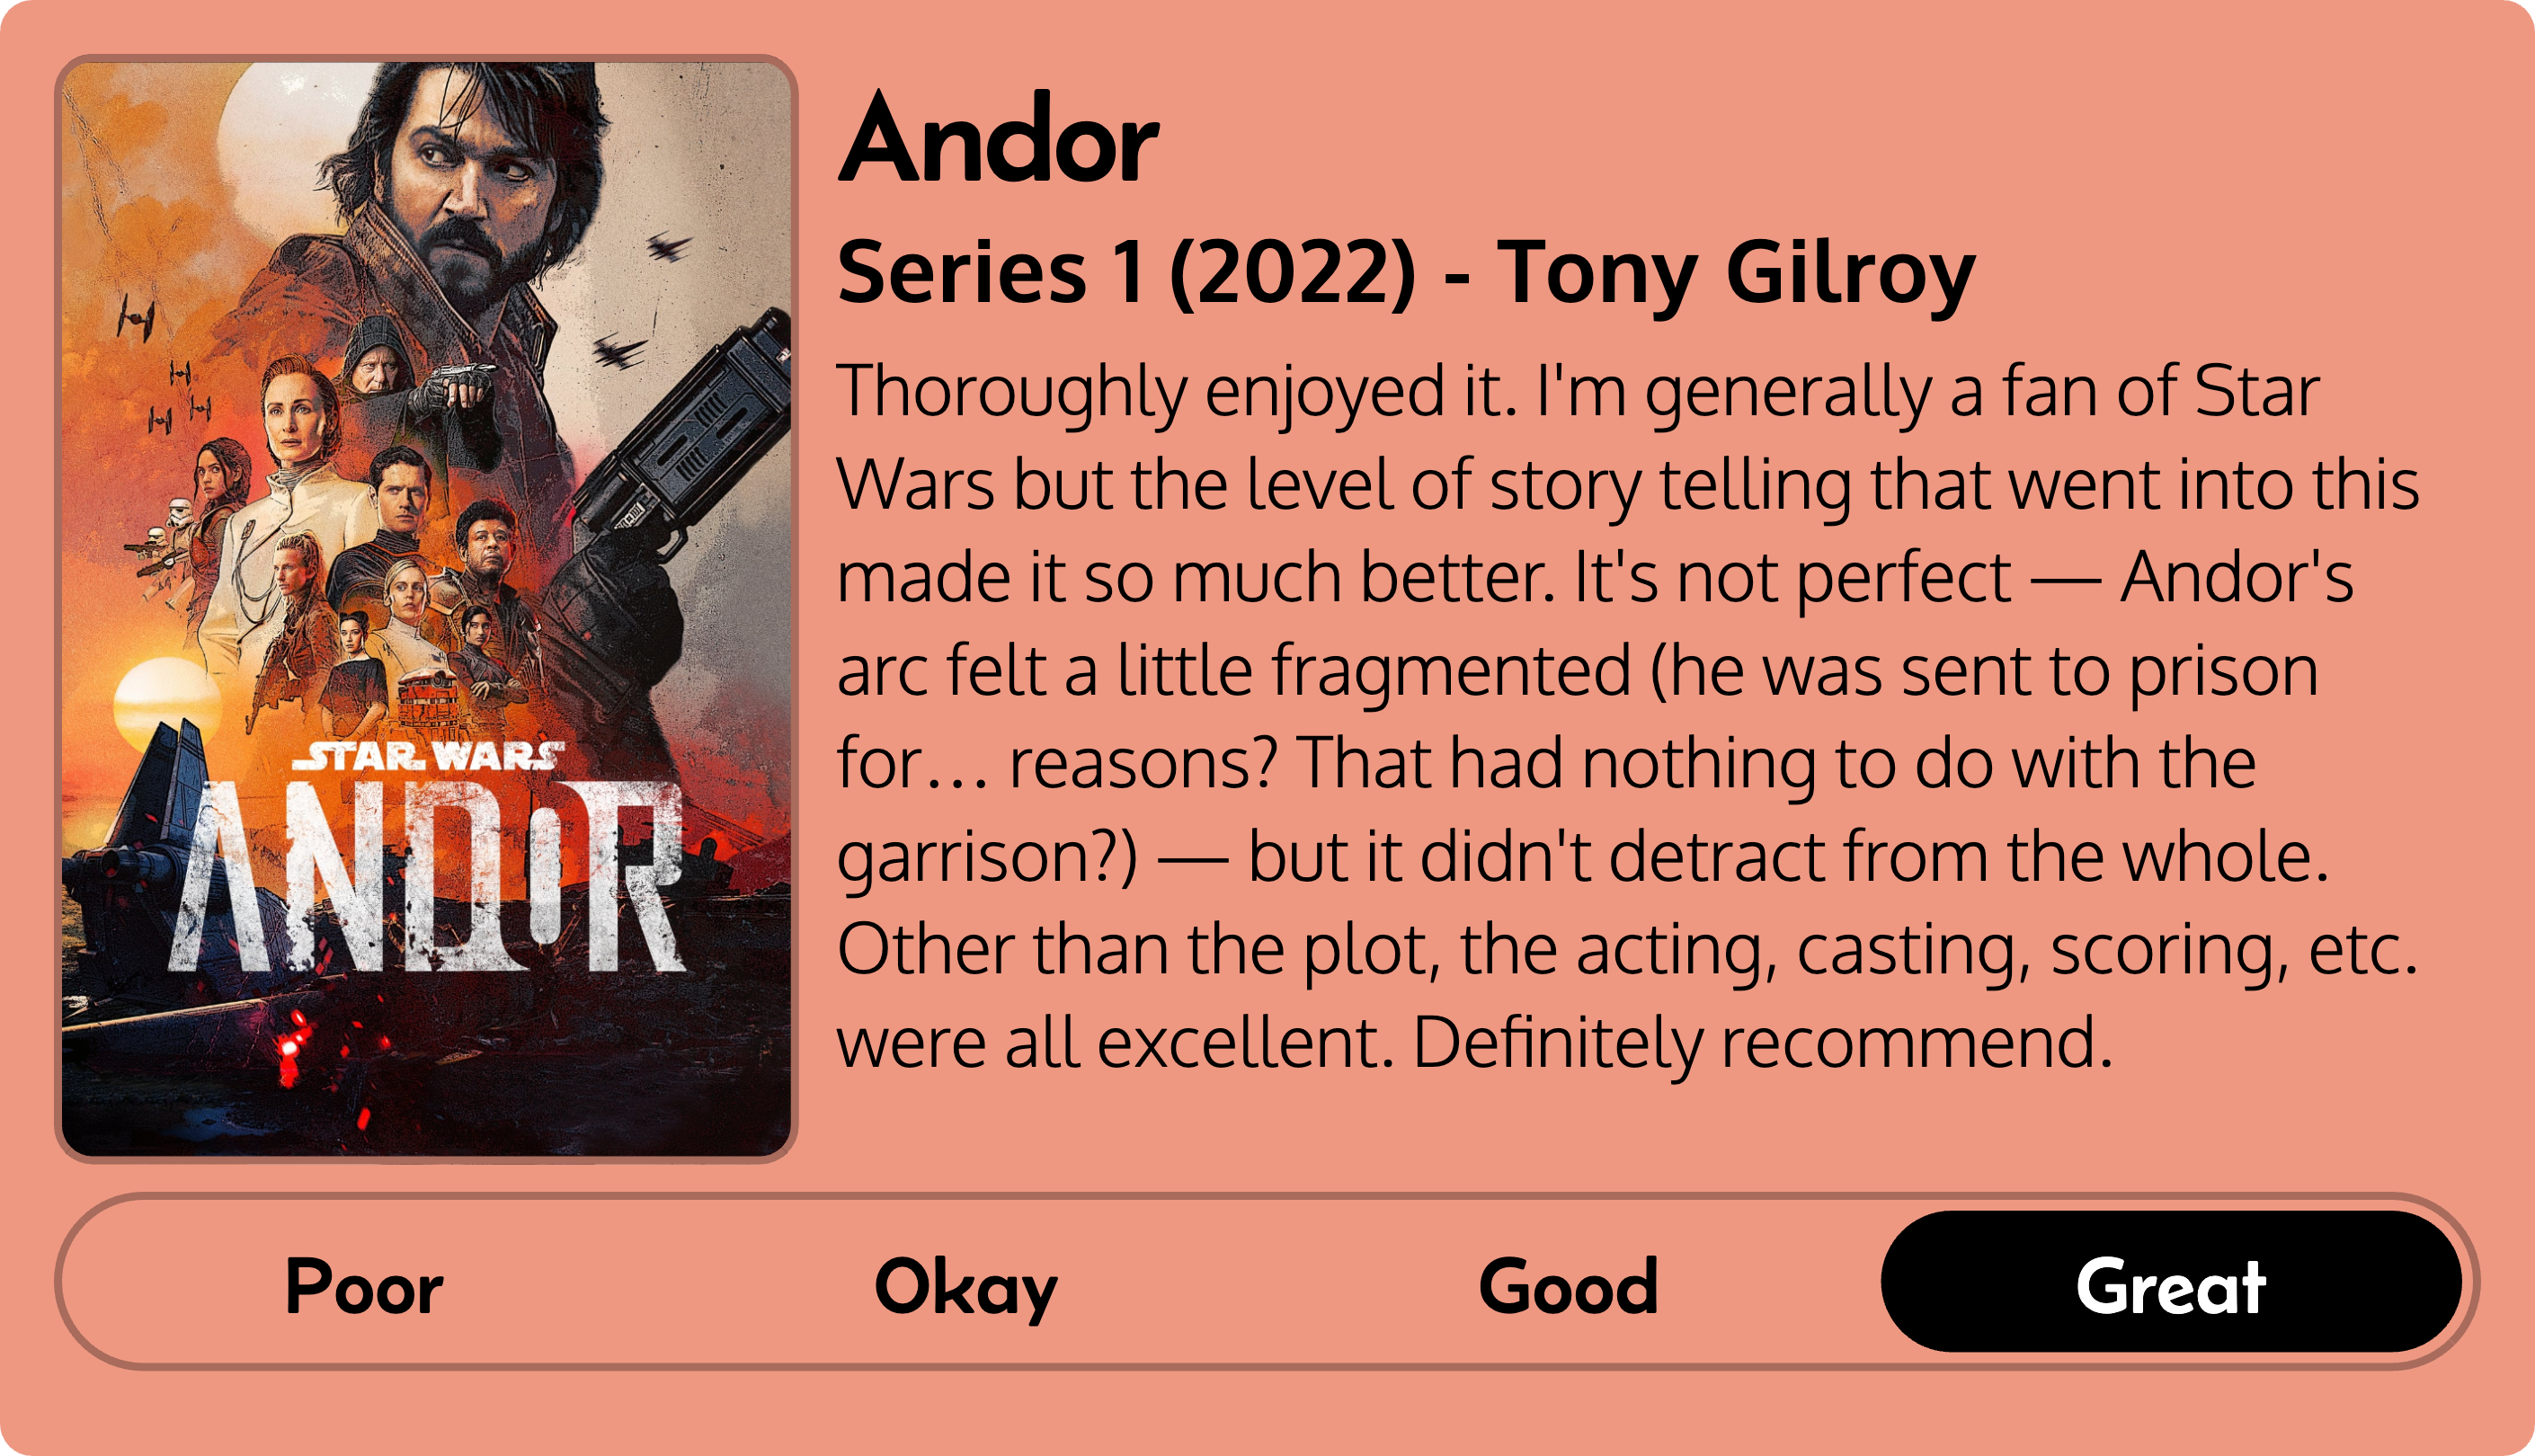 Quick review of Andor: Series 1 (2022), created by Tony Gilroy. Thoroughly enjoyed it. I'm generally a fan of Star Wars but the level of story telling that went into this made it so much better. It's not perfect — Andor's arc felt a little fragmented (he was sent to prison for… reasons? That had nothing to do with the garrison?) — but it didn't detract from the whole. Other than the plot, the acting, casting, scoring, etc. were all excellent. Definitely recommend. Rated: great